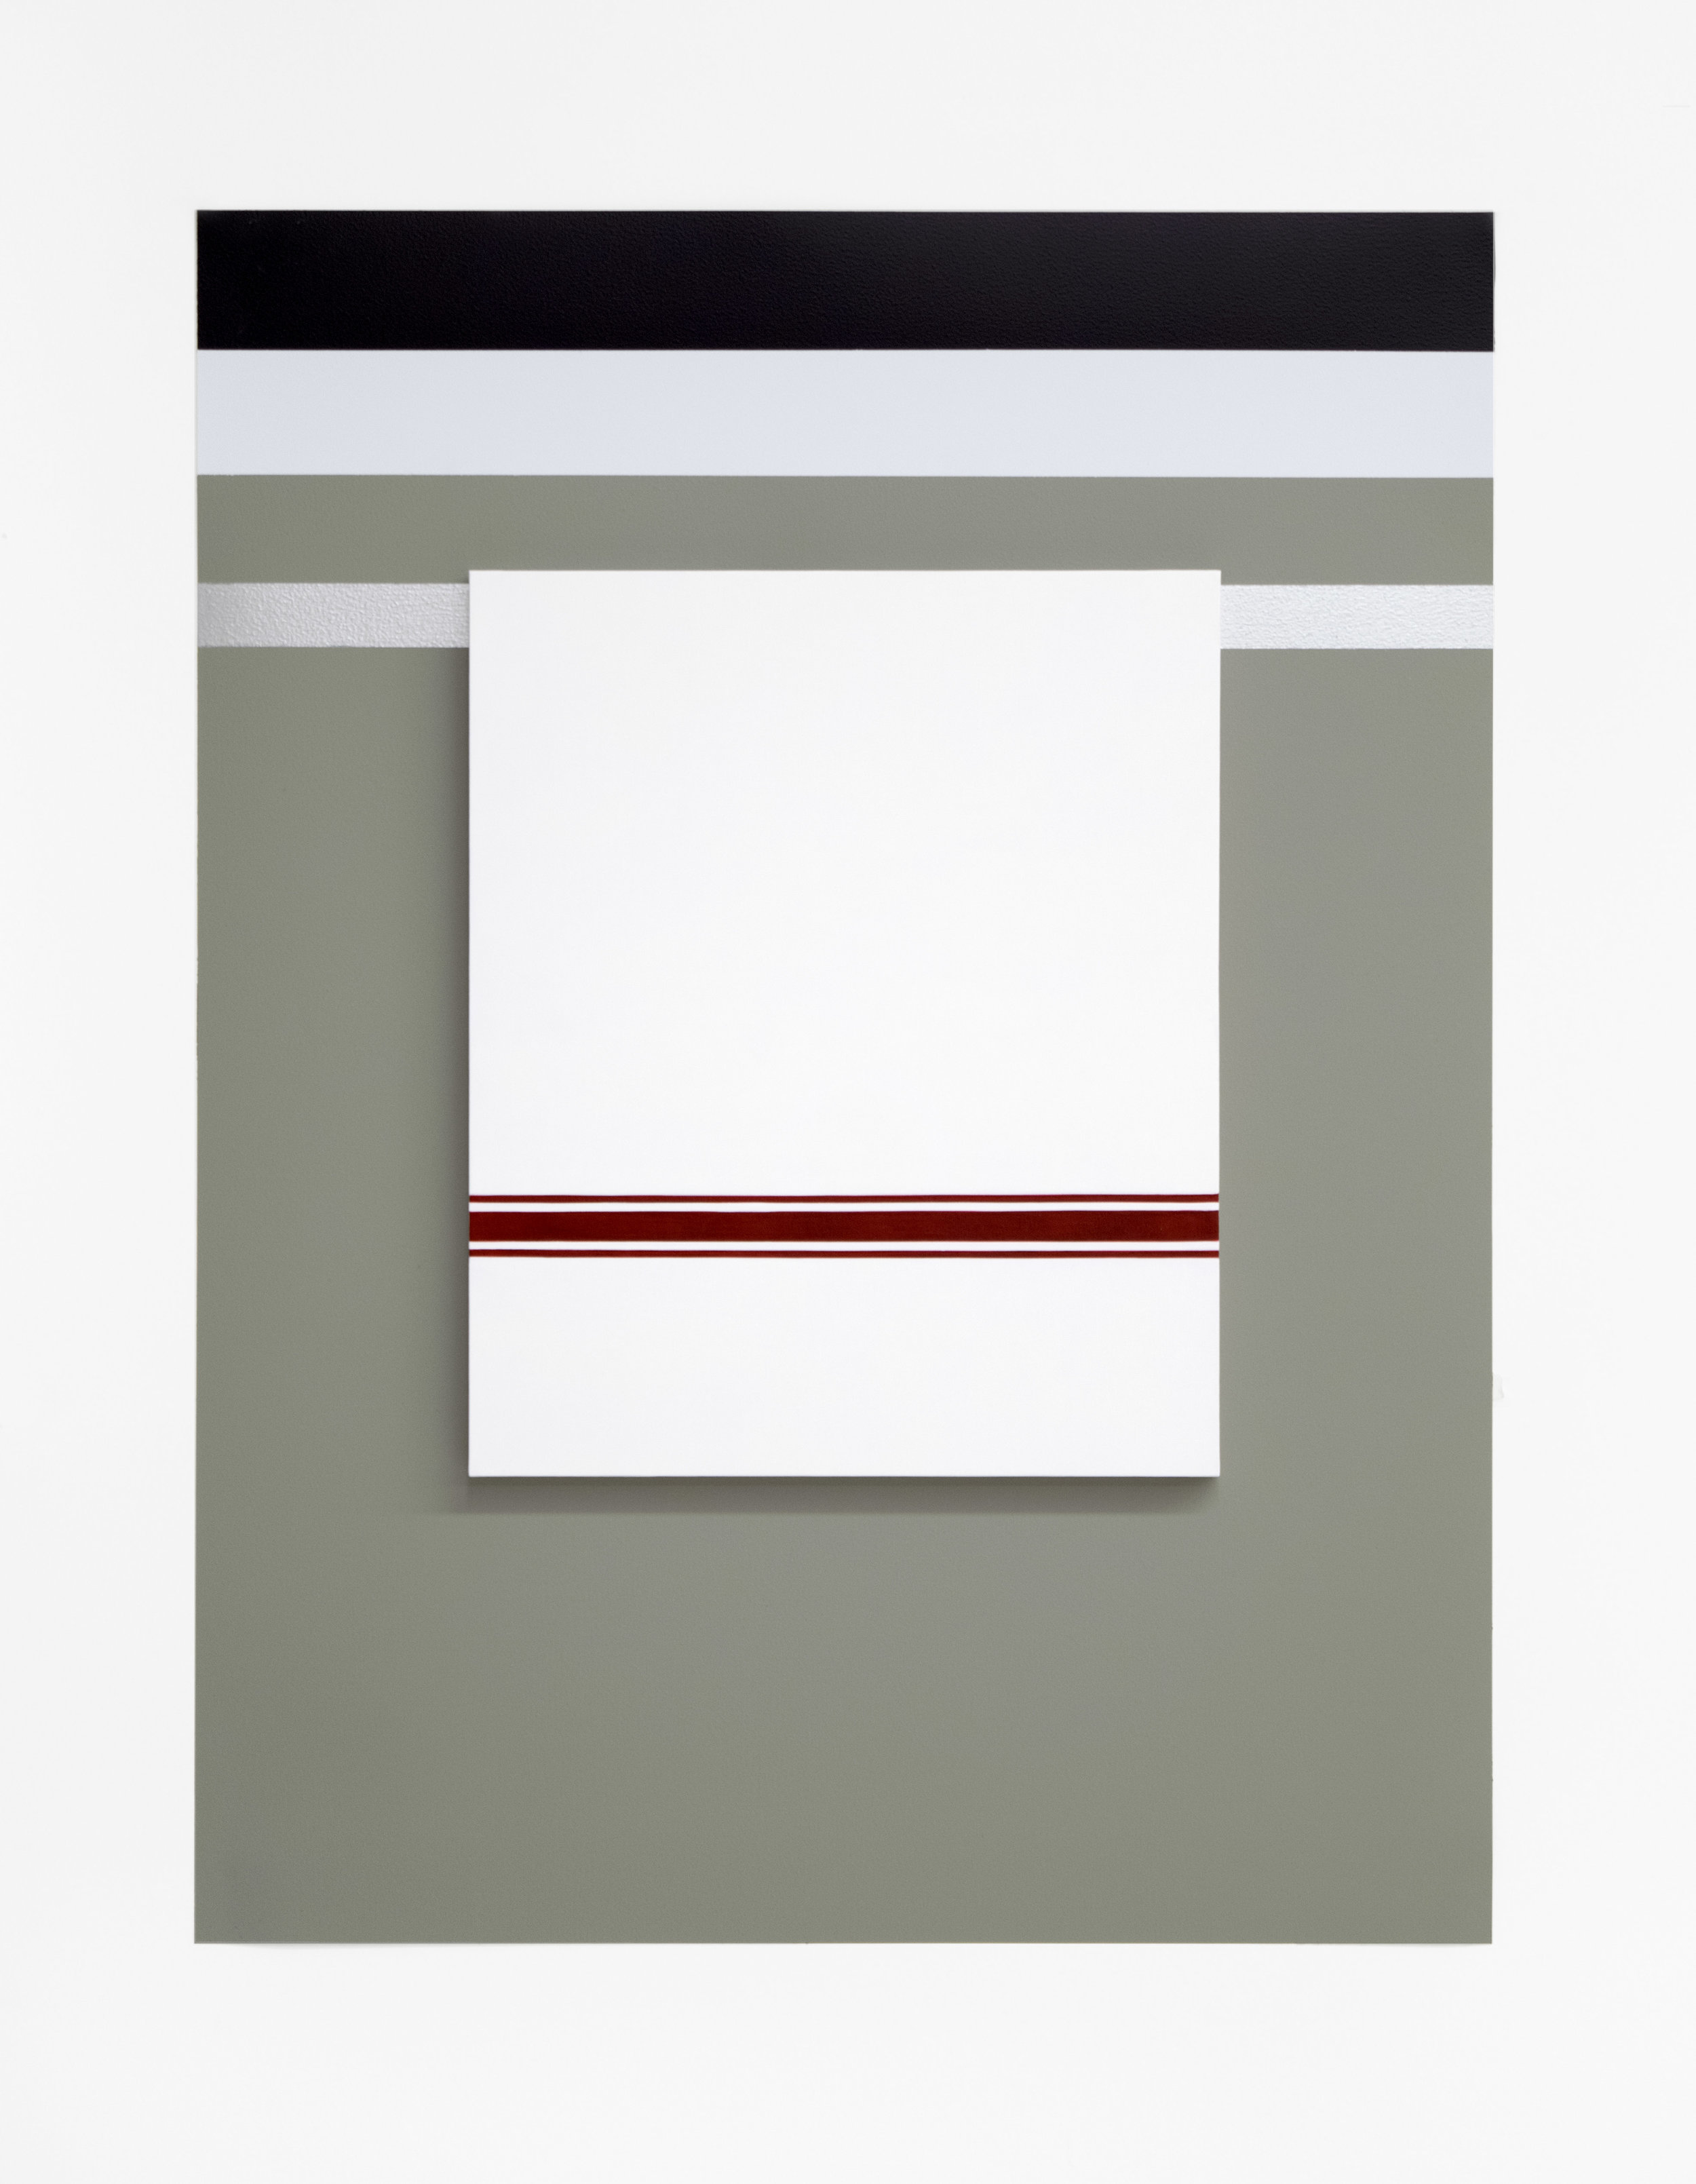   Self Portrait No. 3   2019, 28” h x 21” w x 3/4” d (overall).  Painting: Oil on linen on panel. 14.5” x 12”. Wall: Benjamin Moore: Secret #AF-710,  White Diamond #2121-60, #Black Berry 2119-20, silver acrylic paint. 